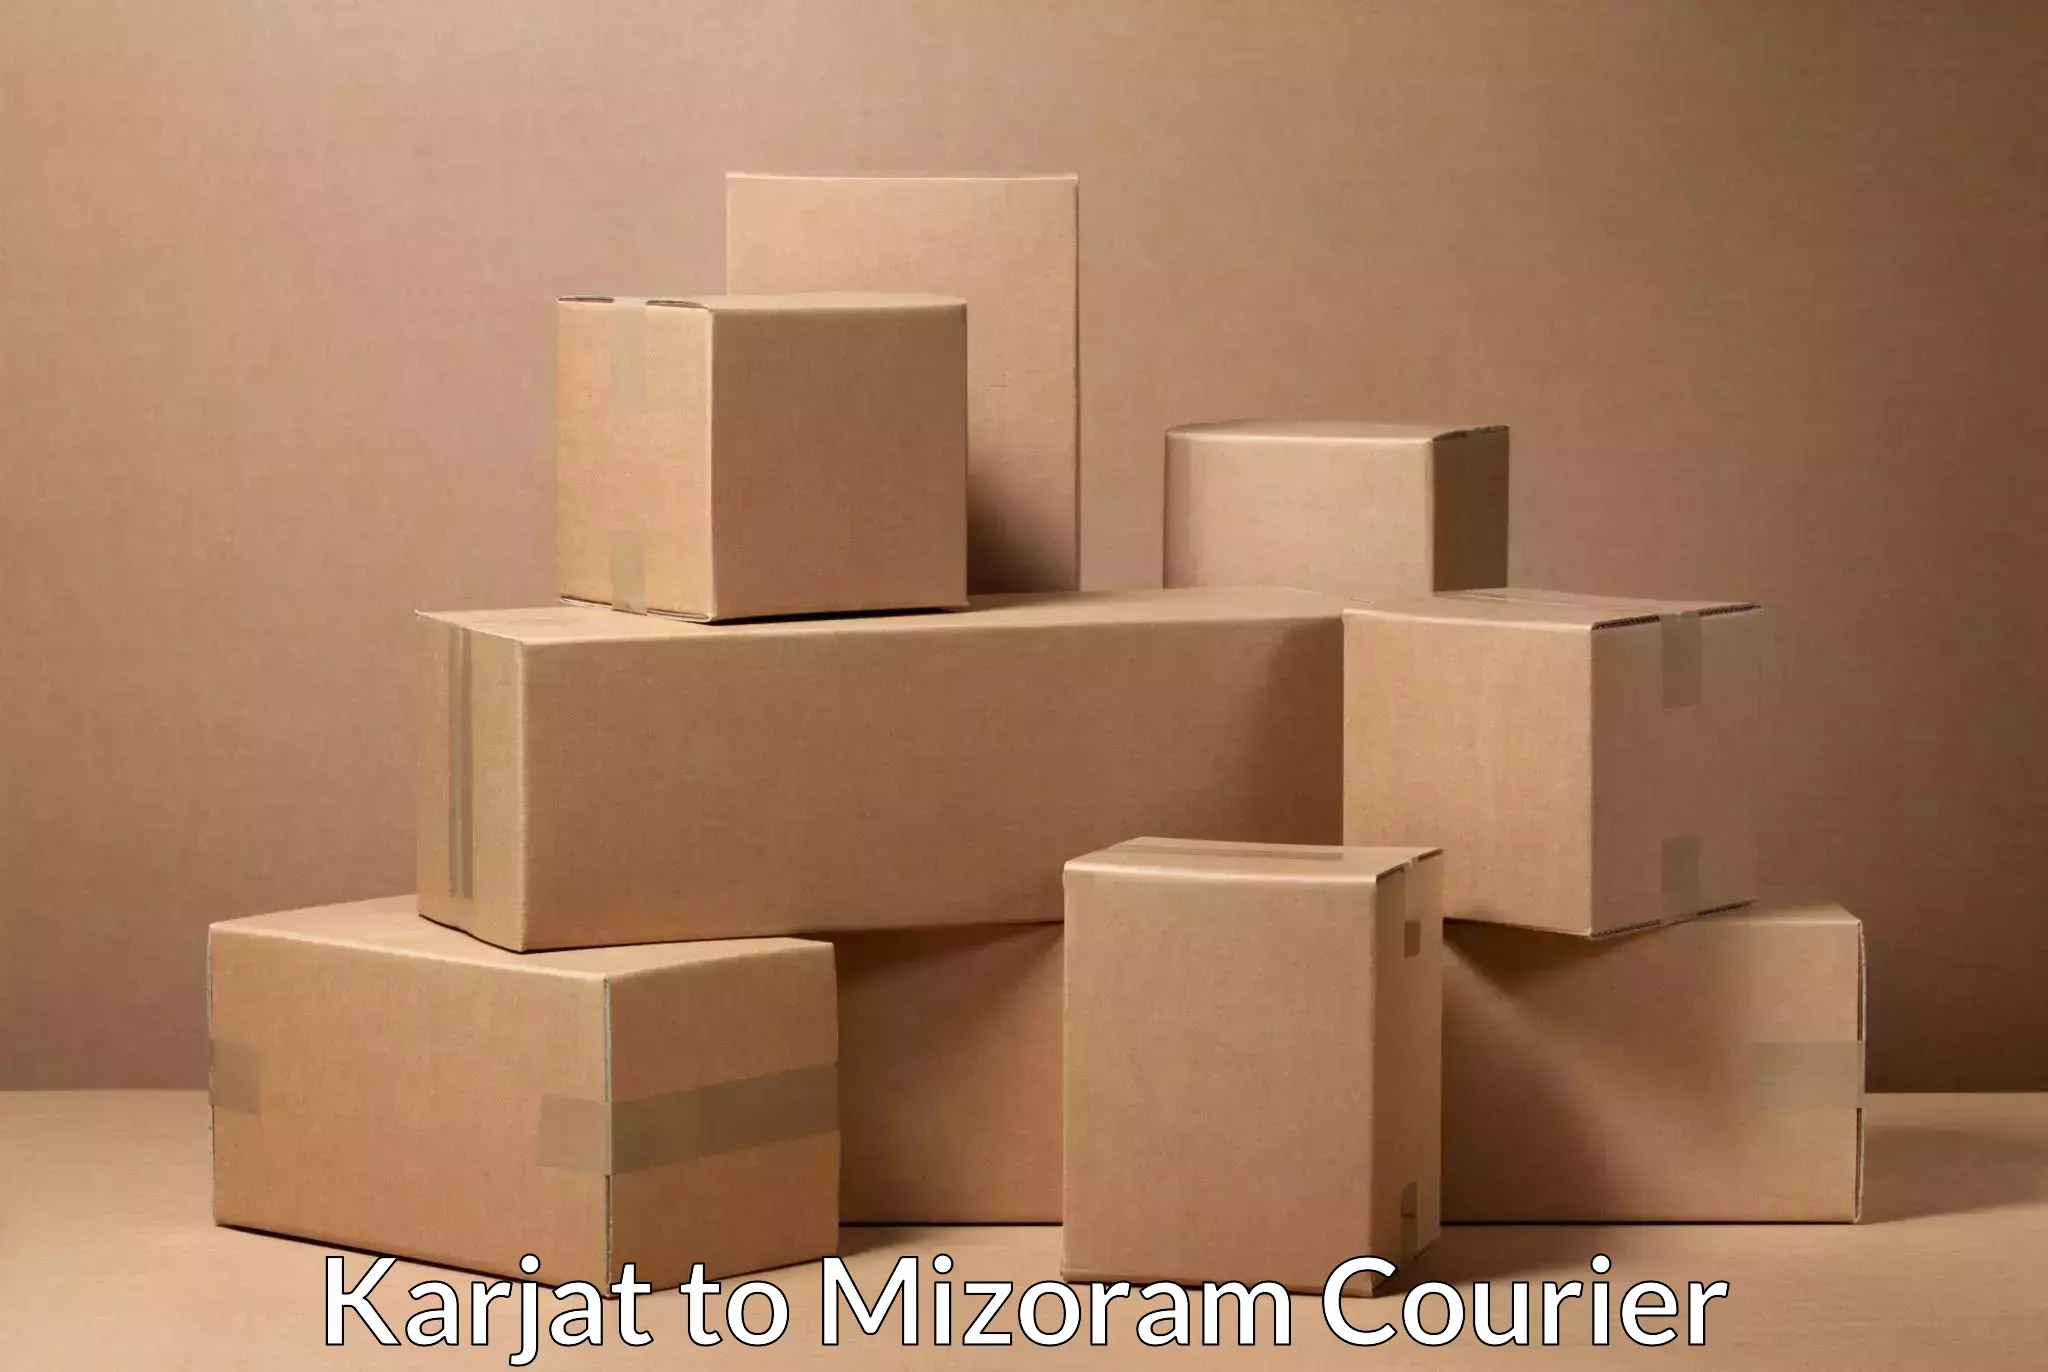 End-to-end delivery Karjat to Mizoram